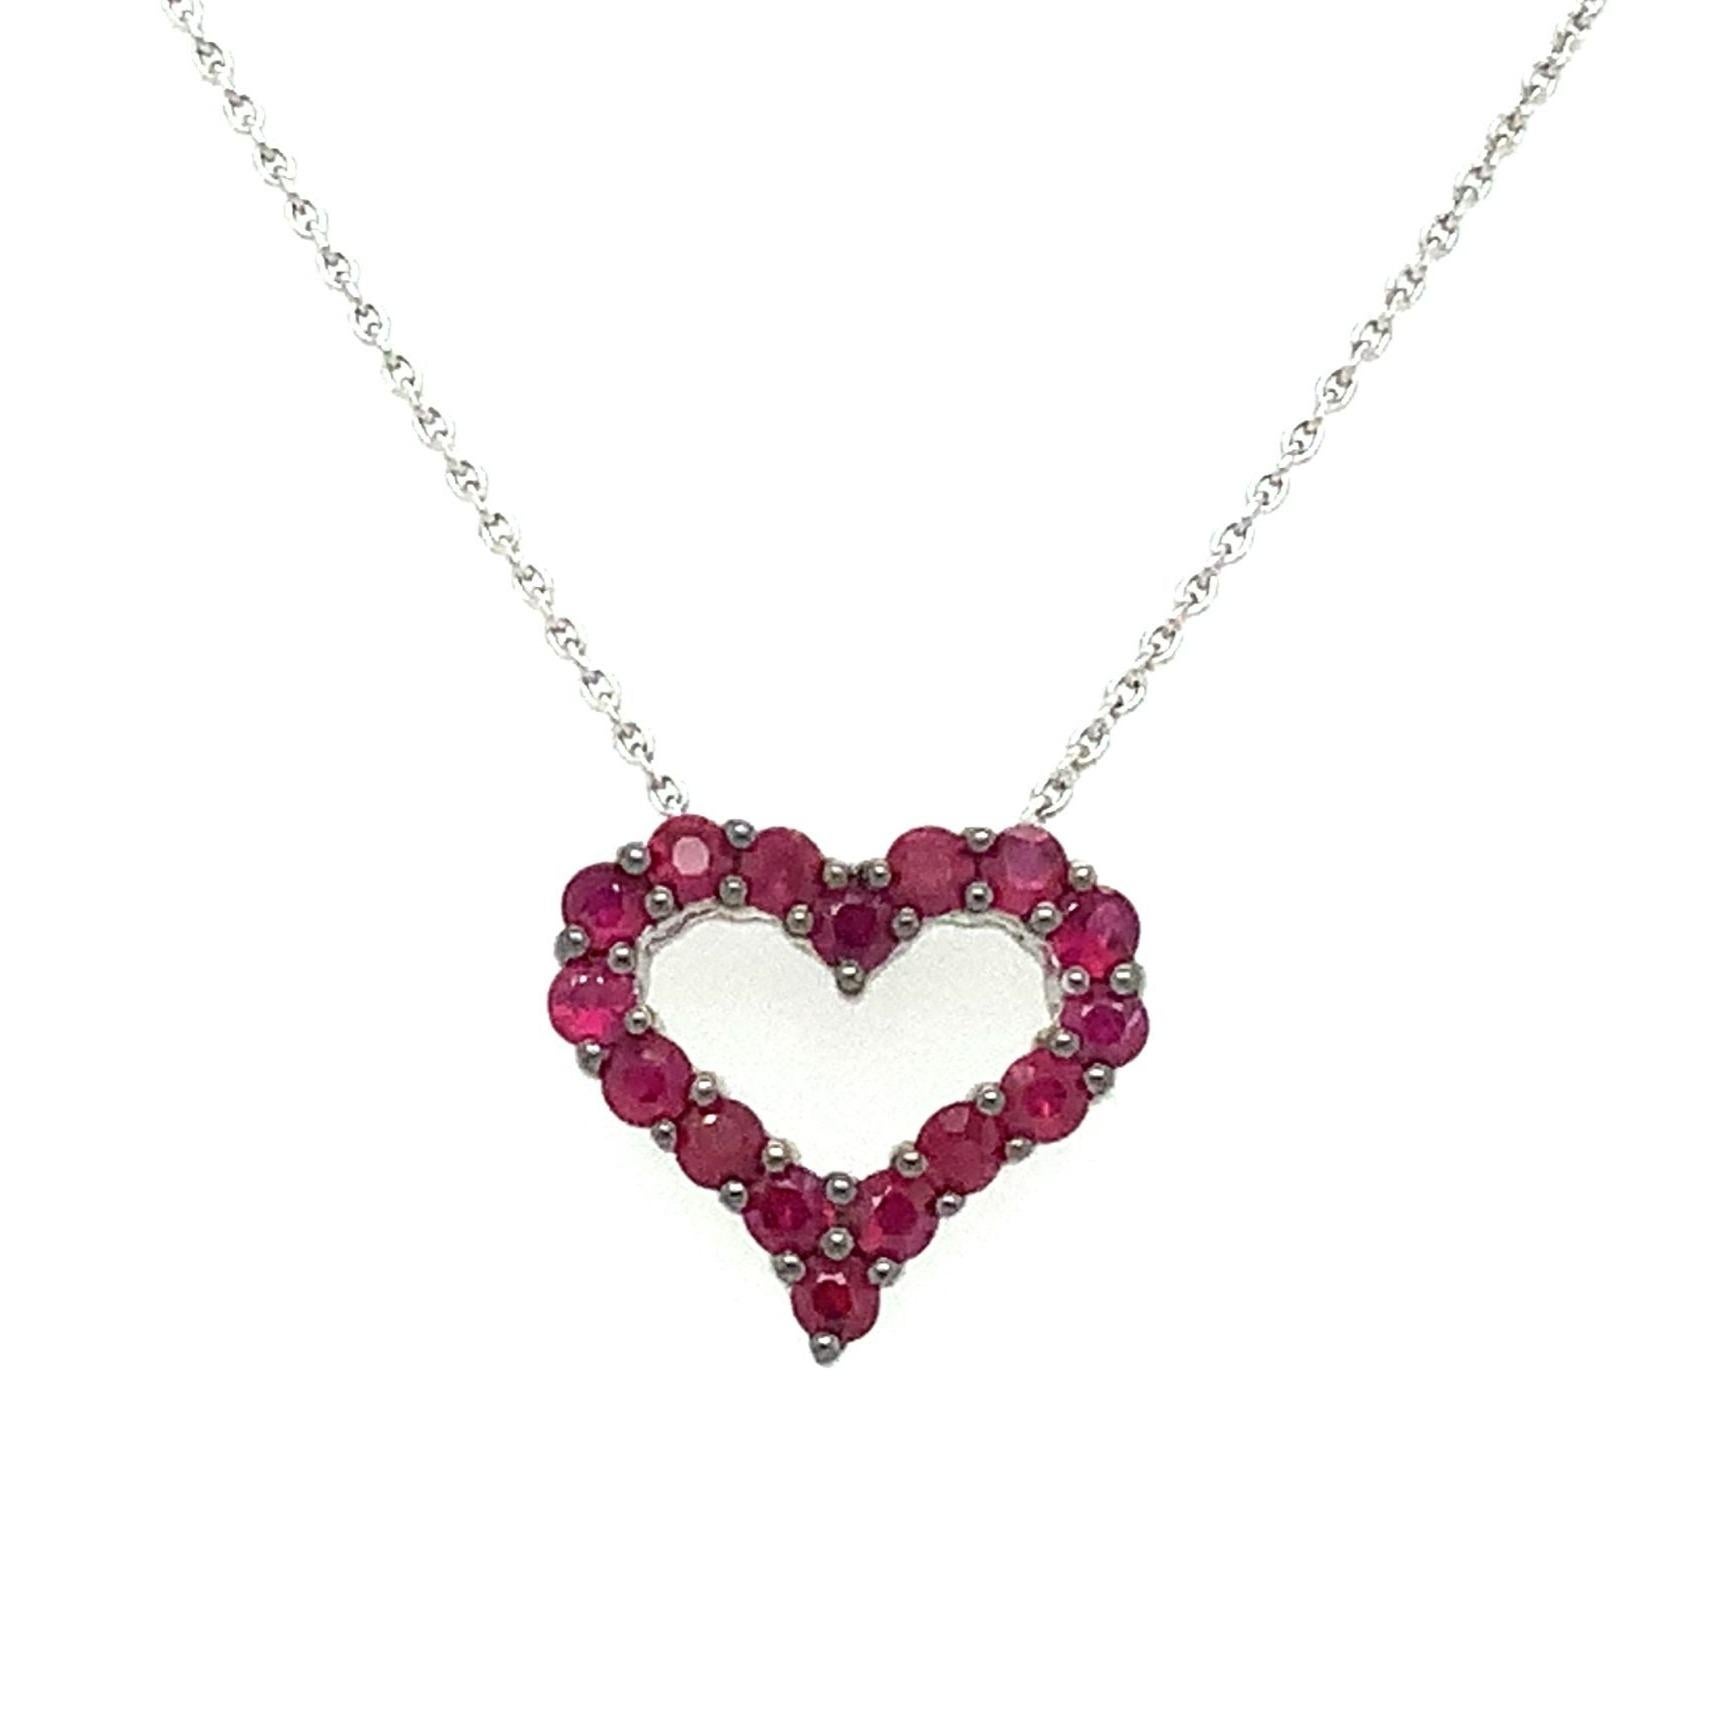 Afarin Collection Classic 1 Row African Ruby Heart Shape Necklace Set in 18K White Gold and Black Rhodium Finish.
16 Round Rubies =0.67 cts t.w.
18